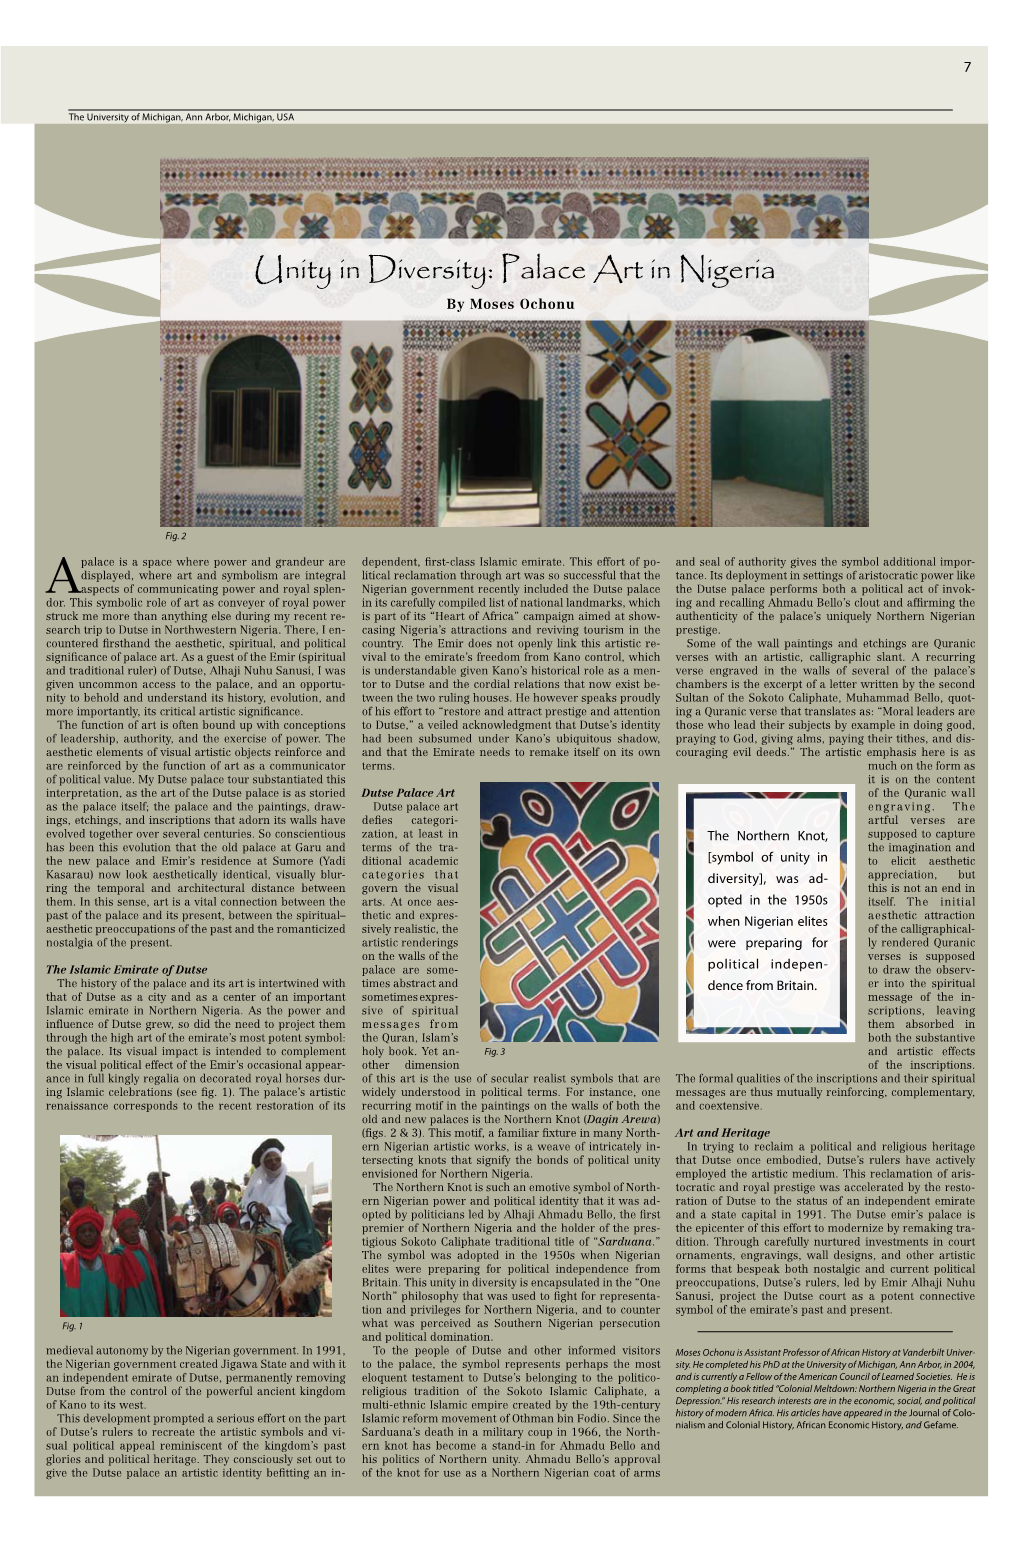 Unity in Diversity: Palace Art in Nigeria by Moses Ochonu